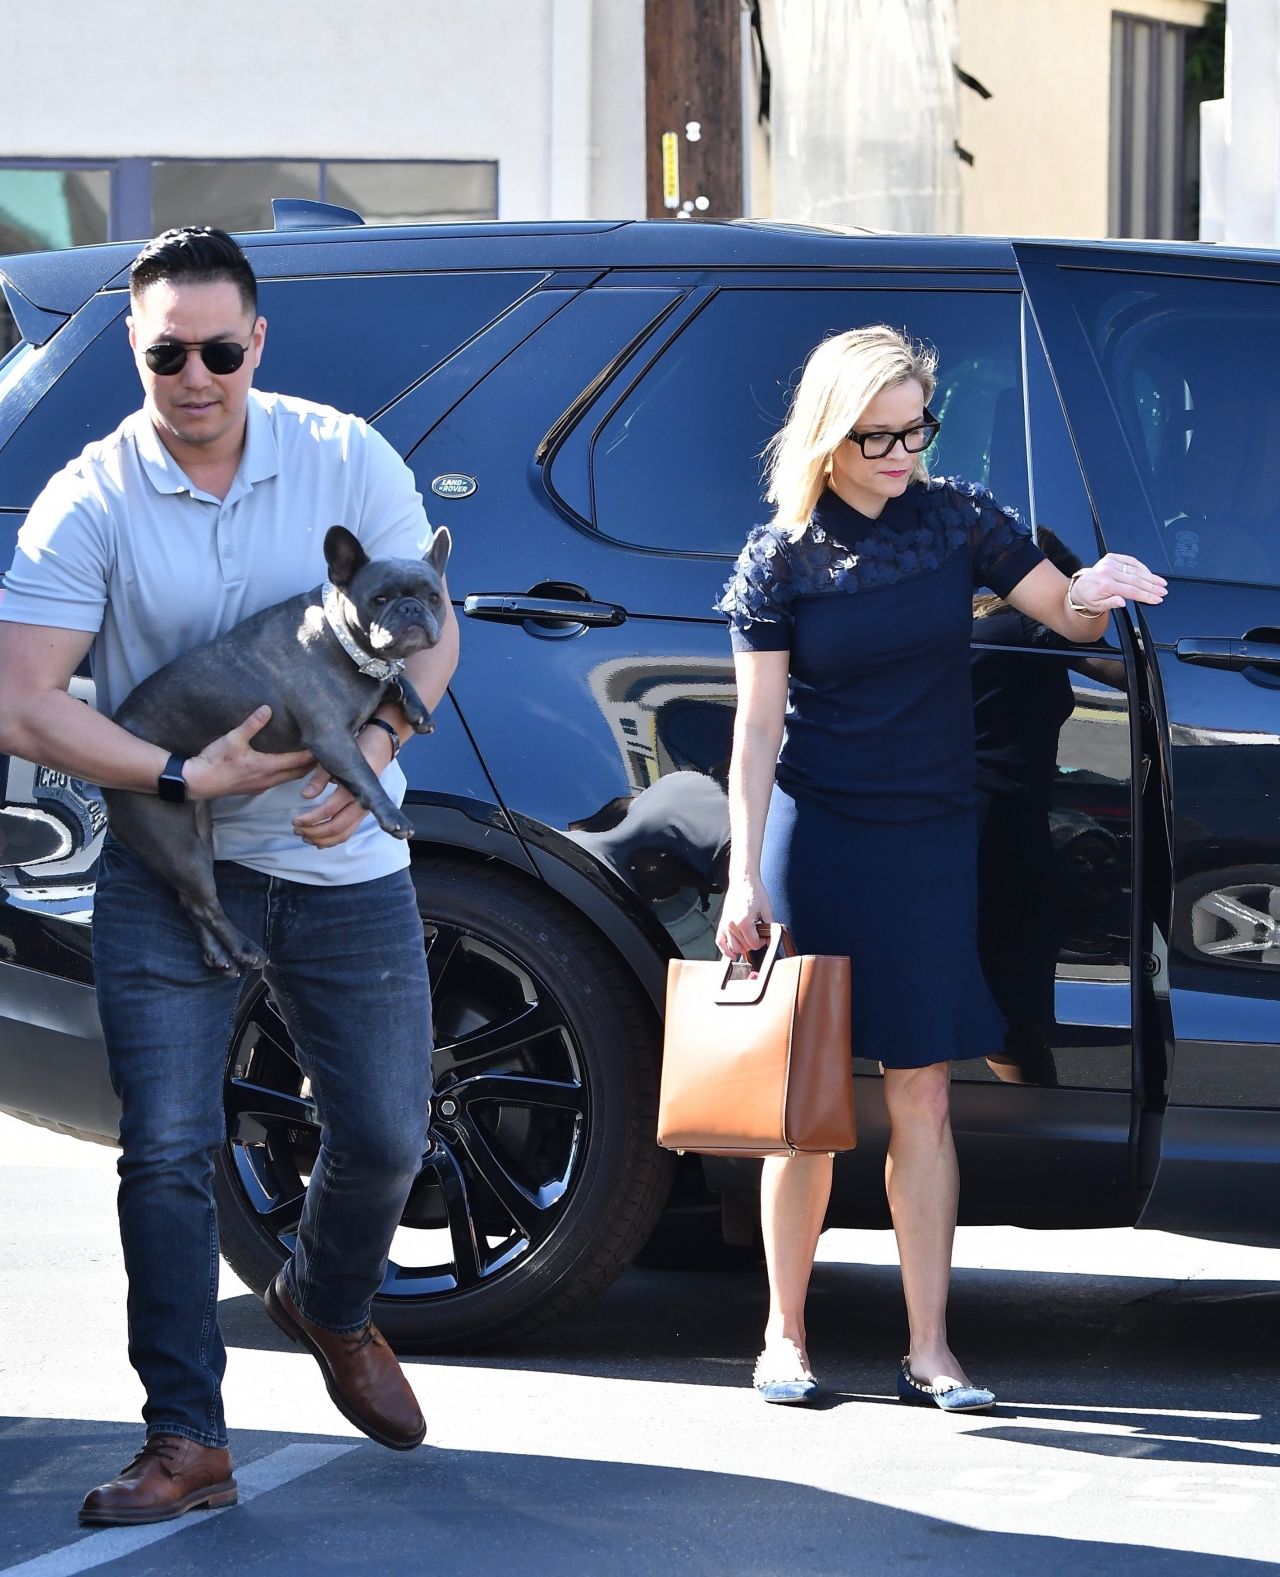 Reese Witherspoon Brentwood September 2, 2020 – Star Style